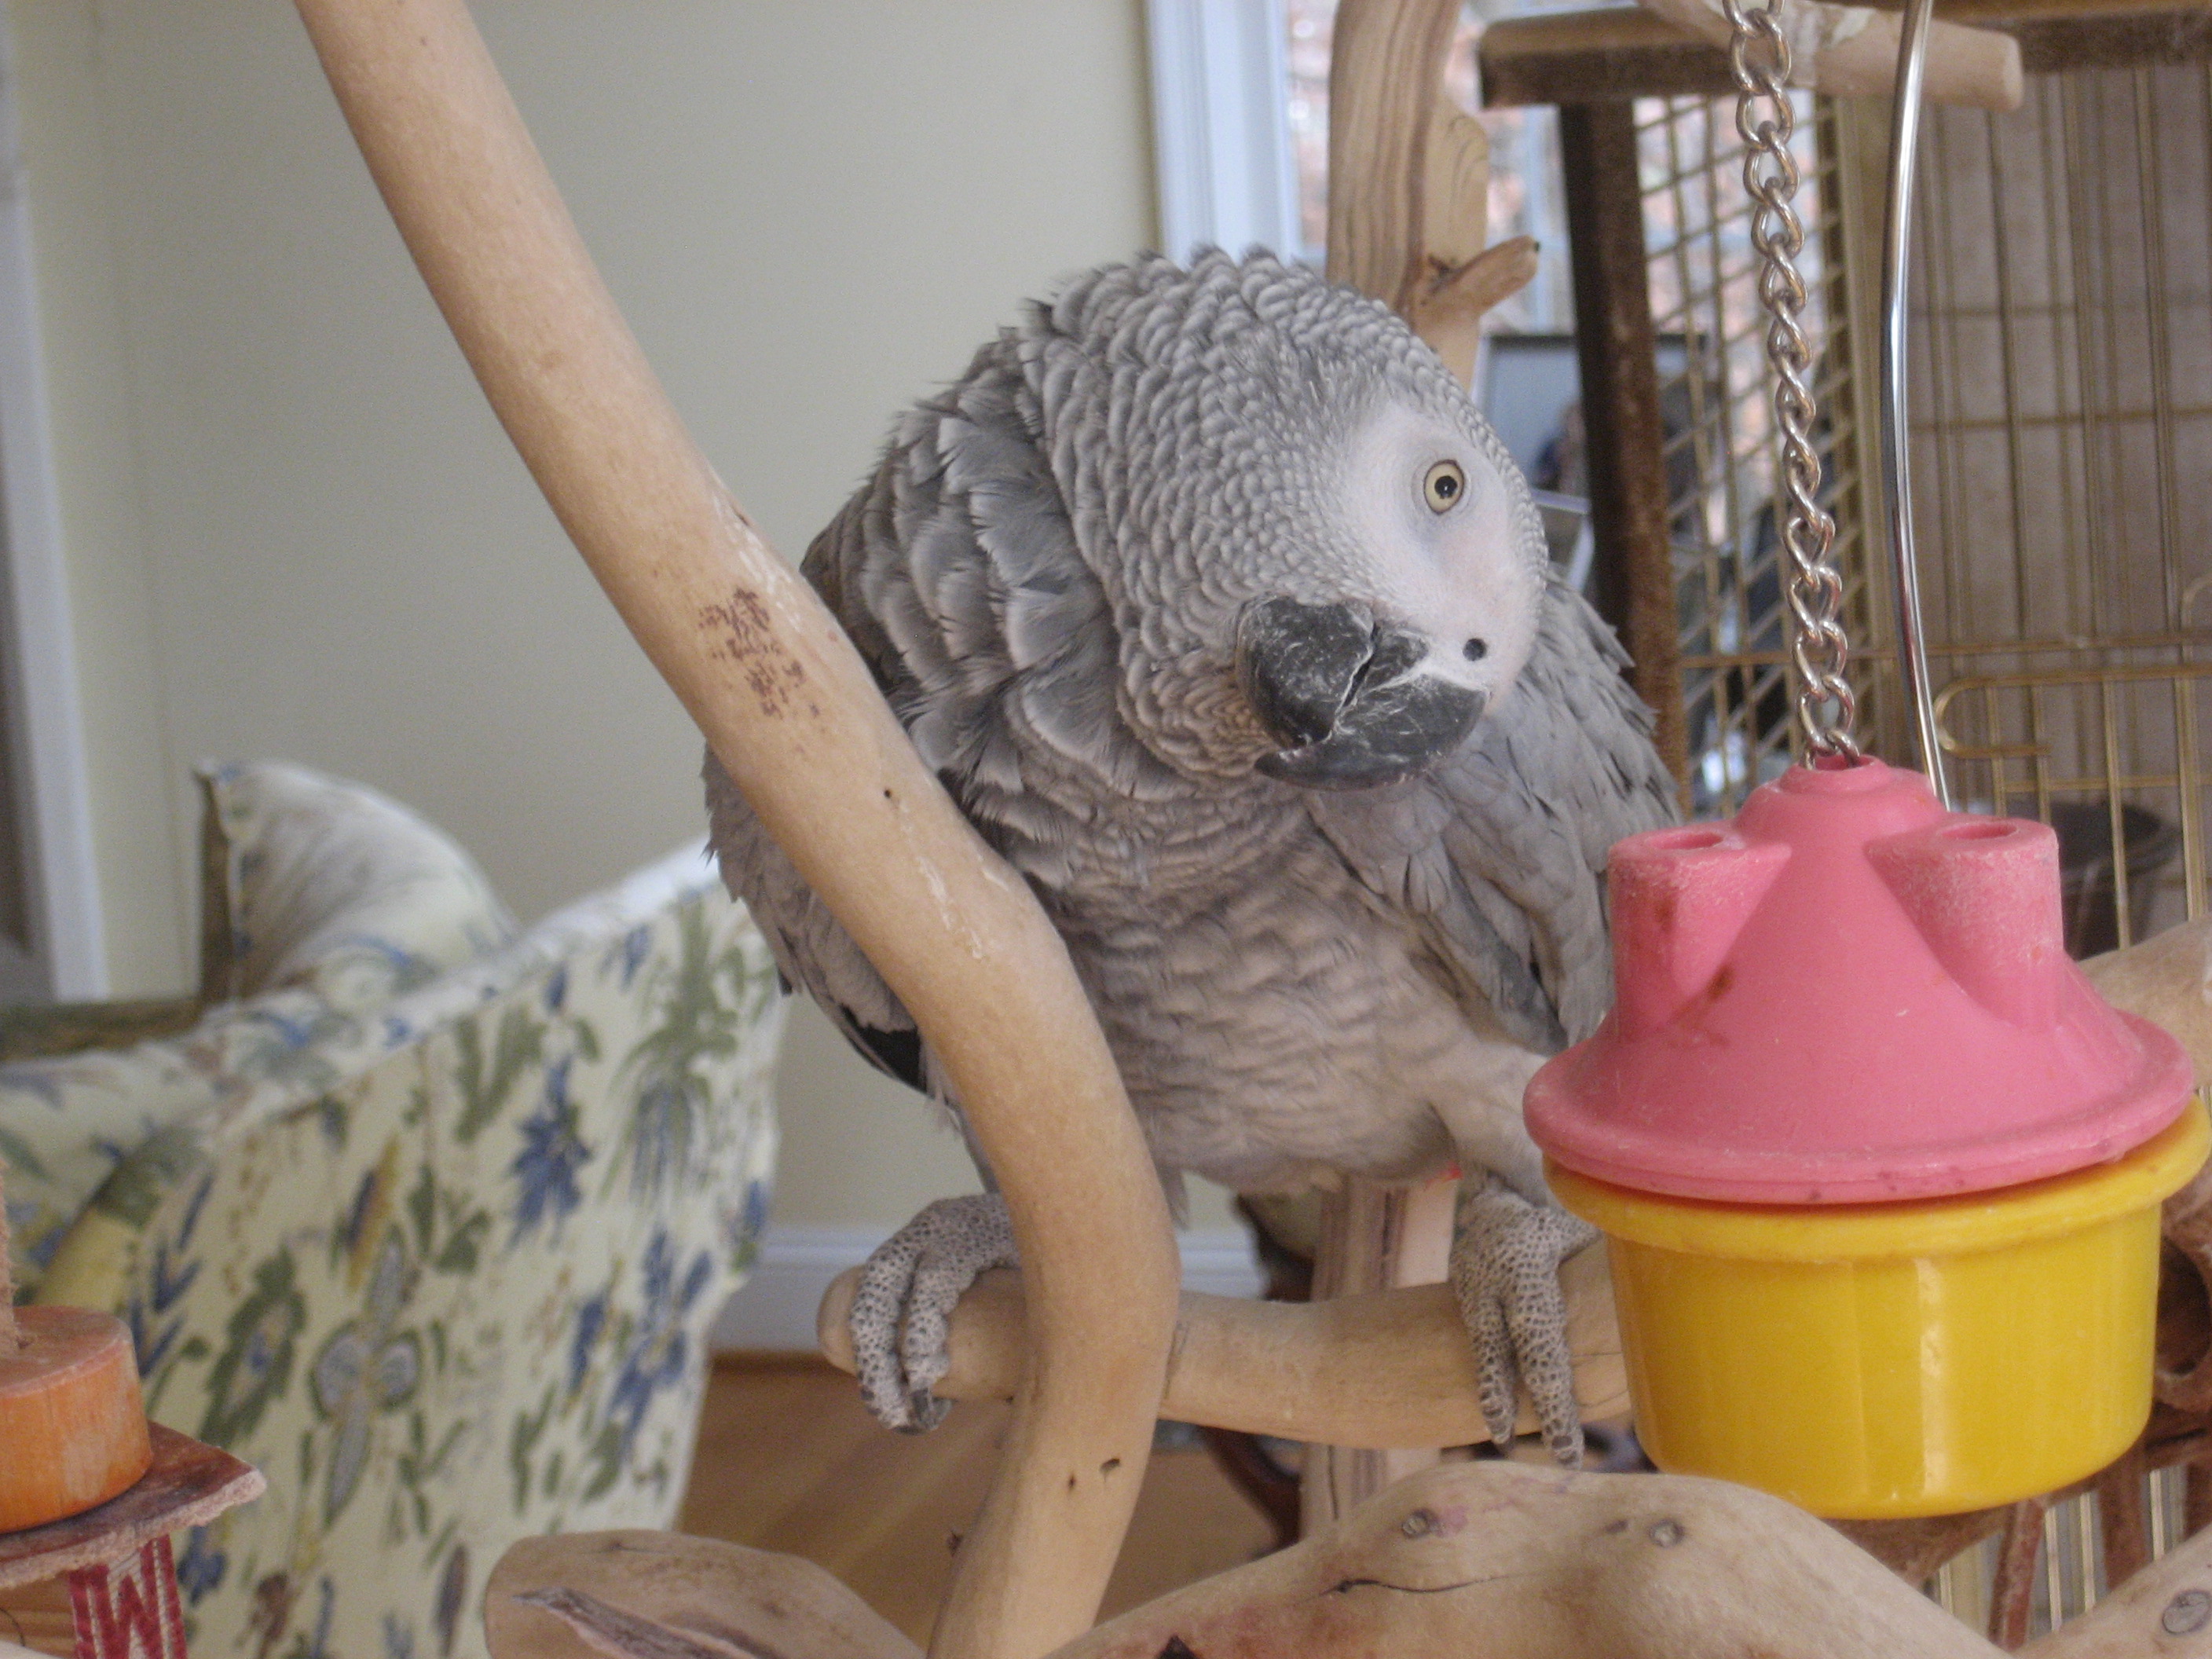 Graycie, our African Gray